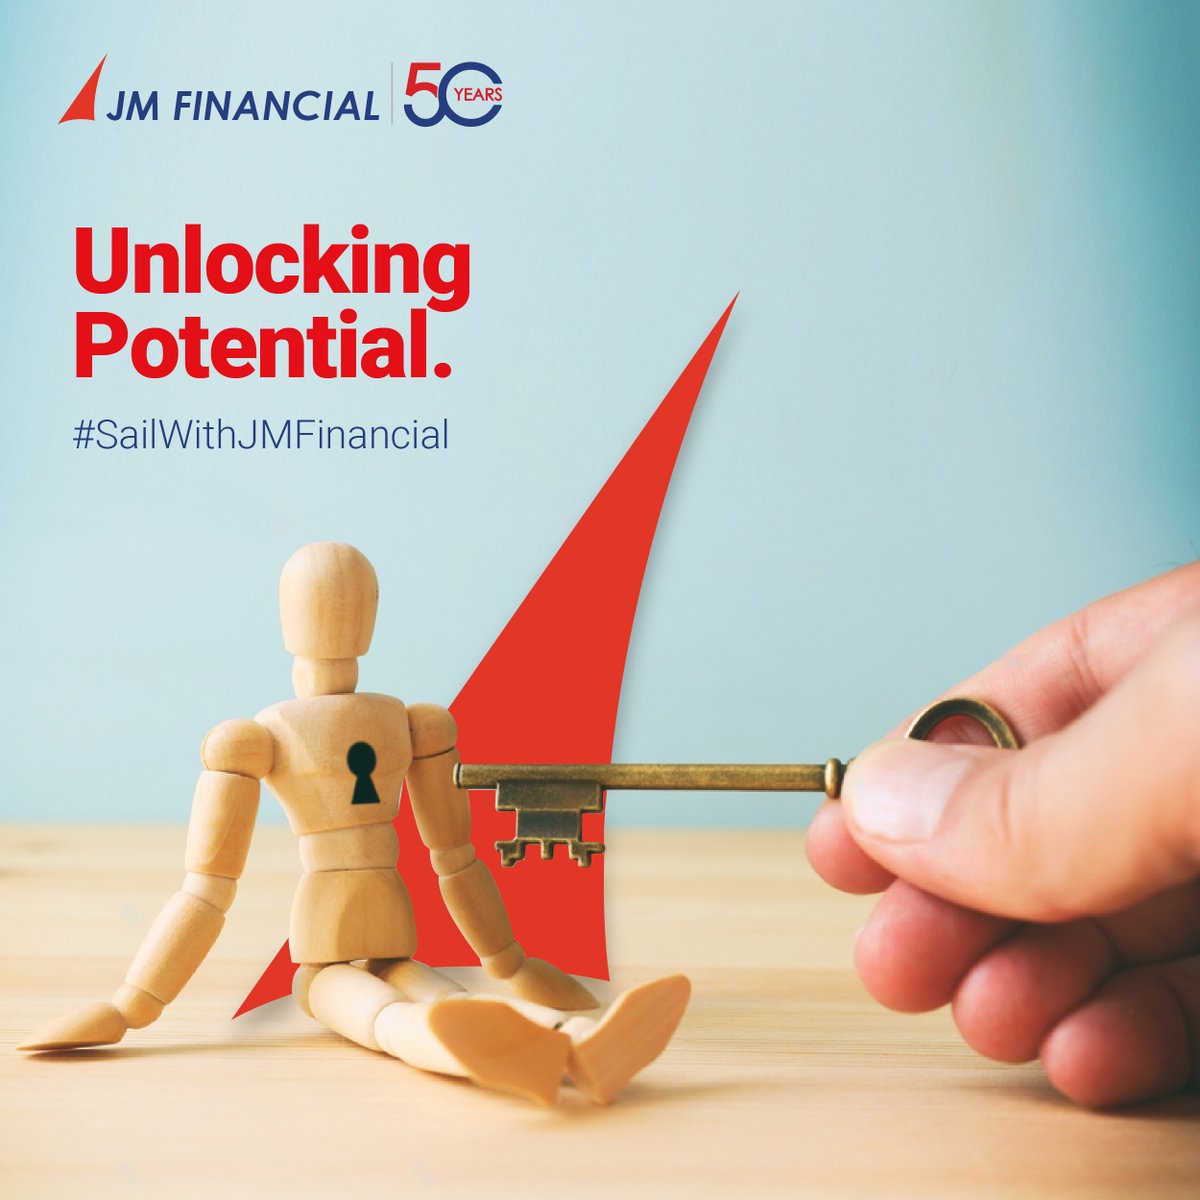 Continuous effort is the key to unlocking our potential.

#JMFinancial #50yearsofJMFinancial #SailWithJMFinancial